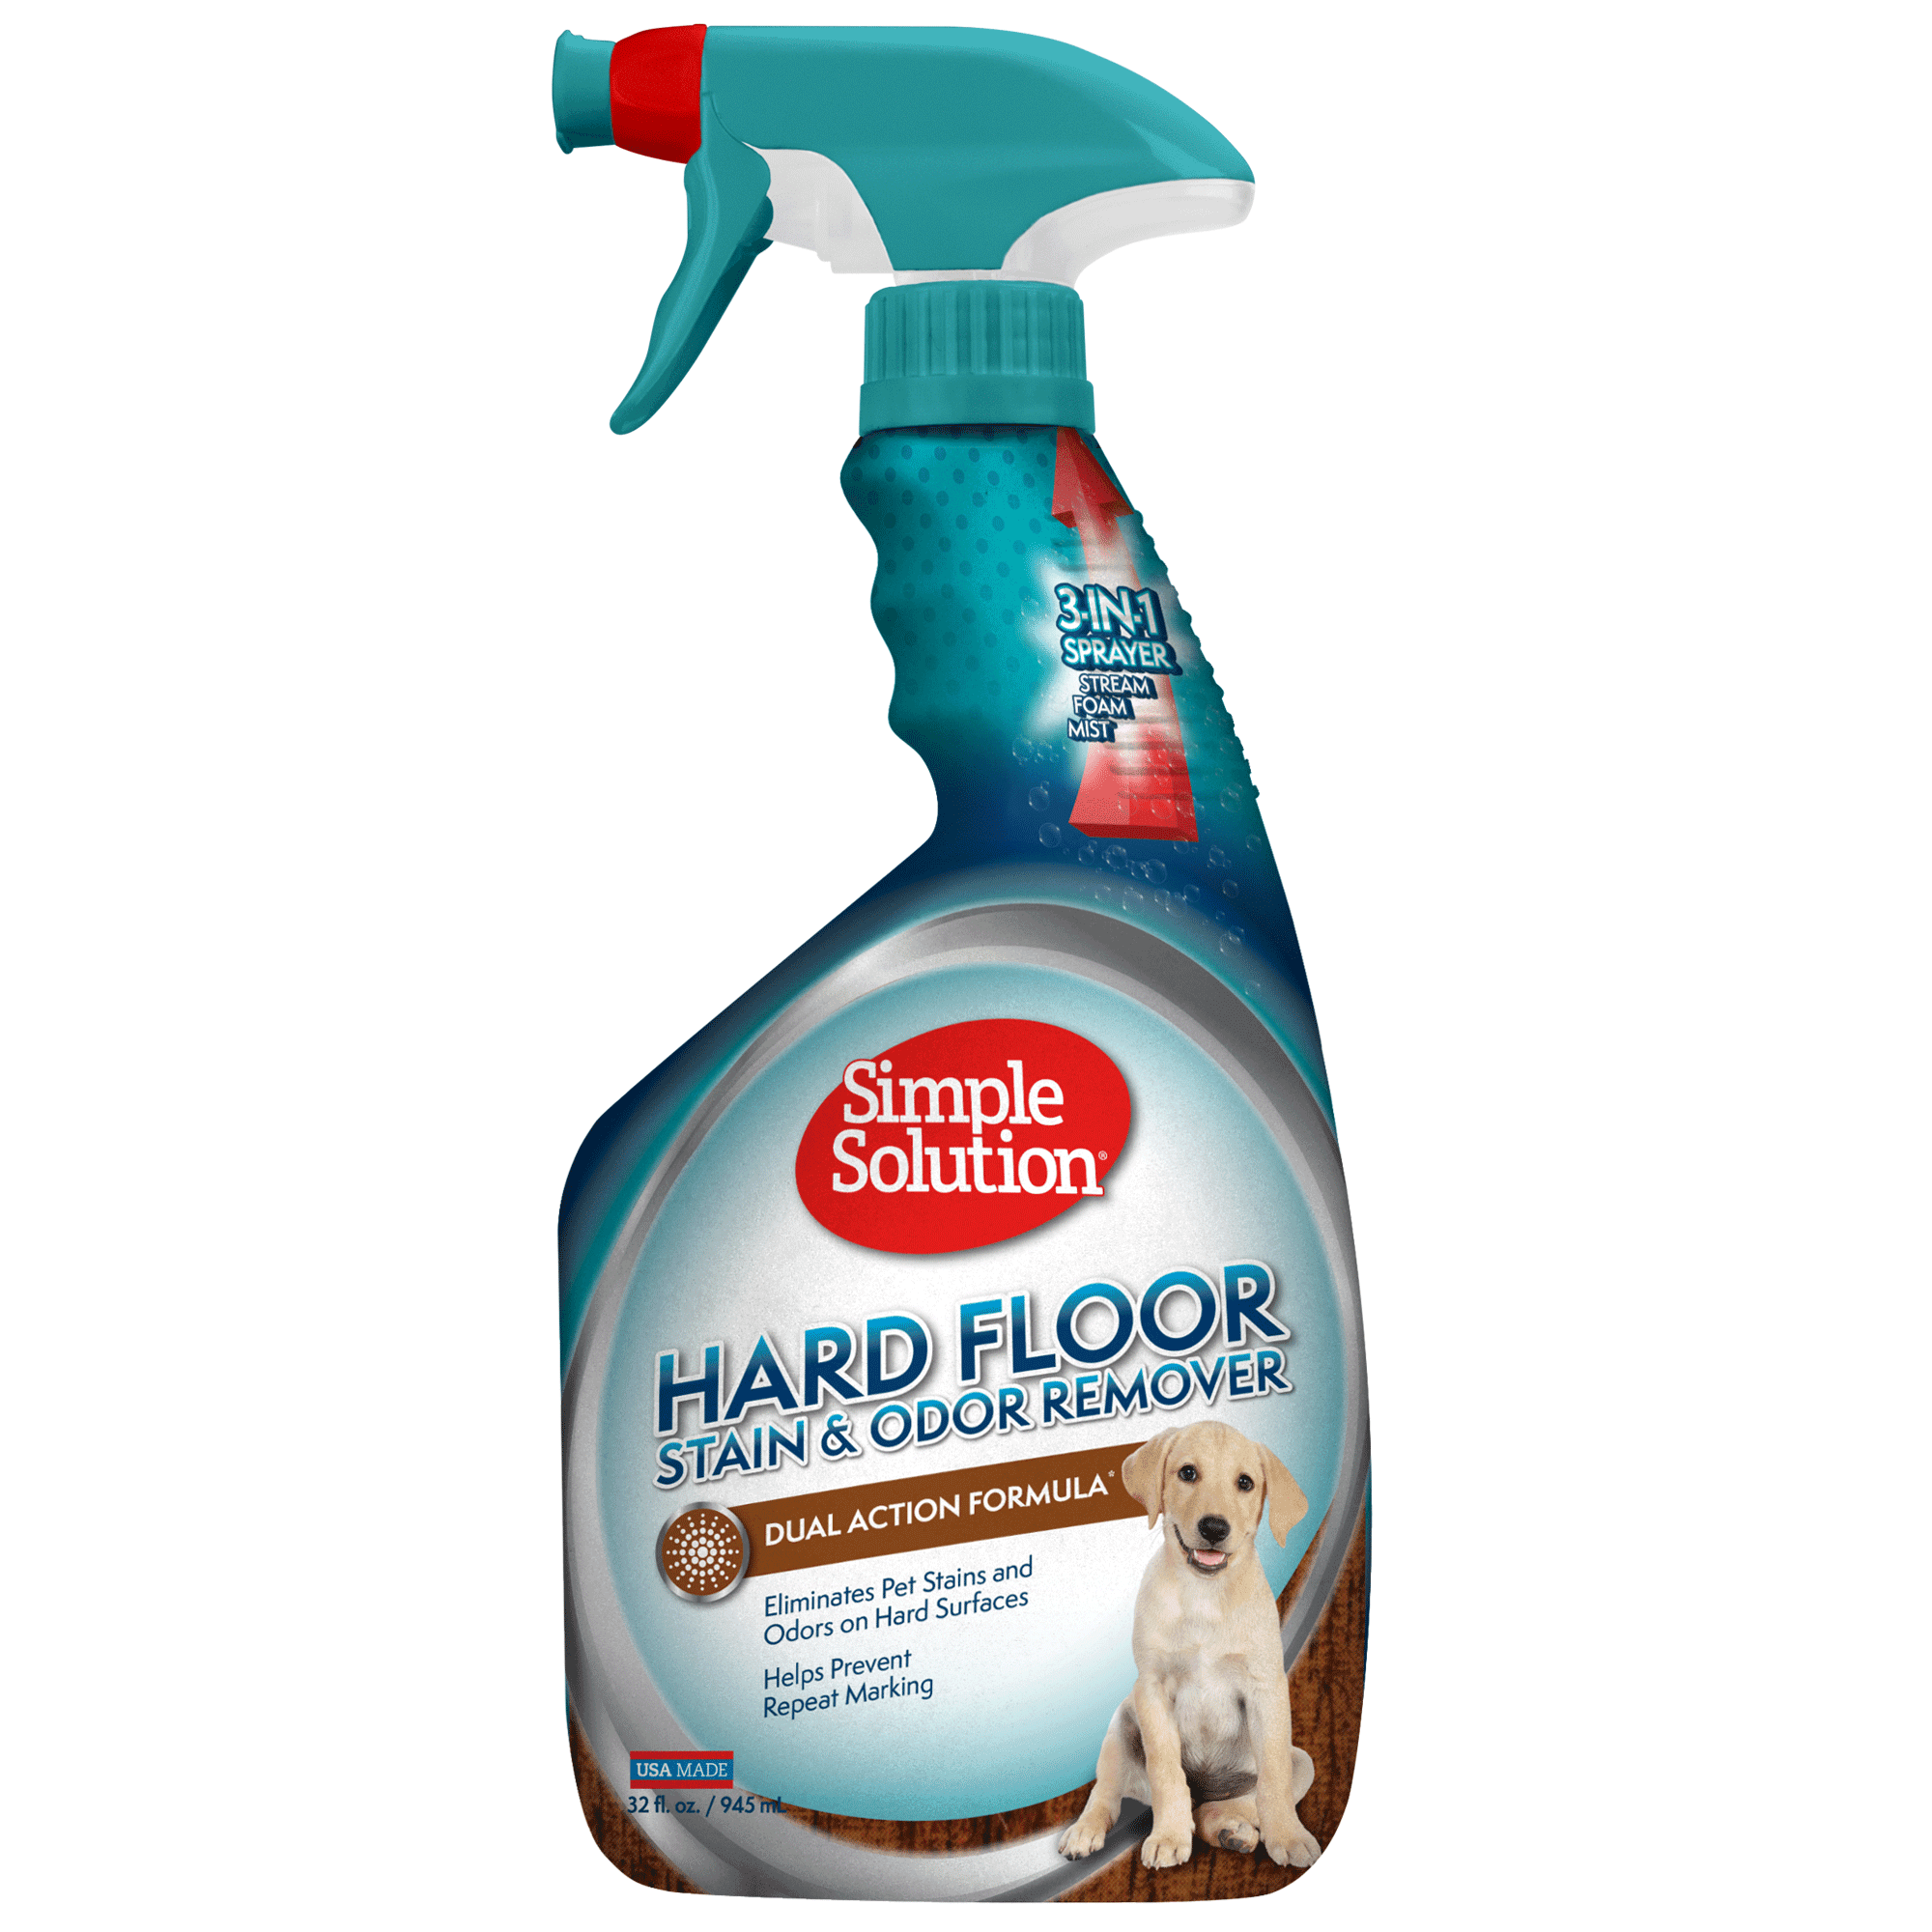 Hard Floor Pet Stain And Odor Remover, How To Remove Pet Stains And Odor From Hardwood Floors